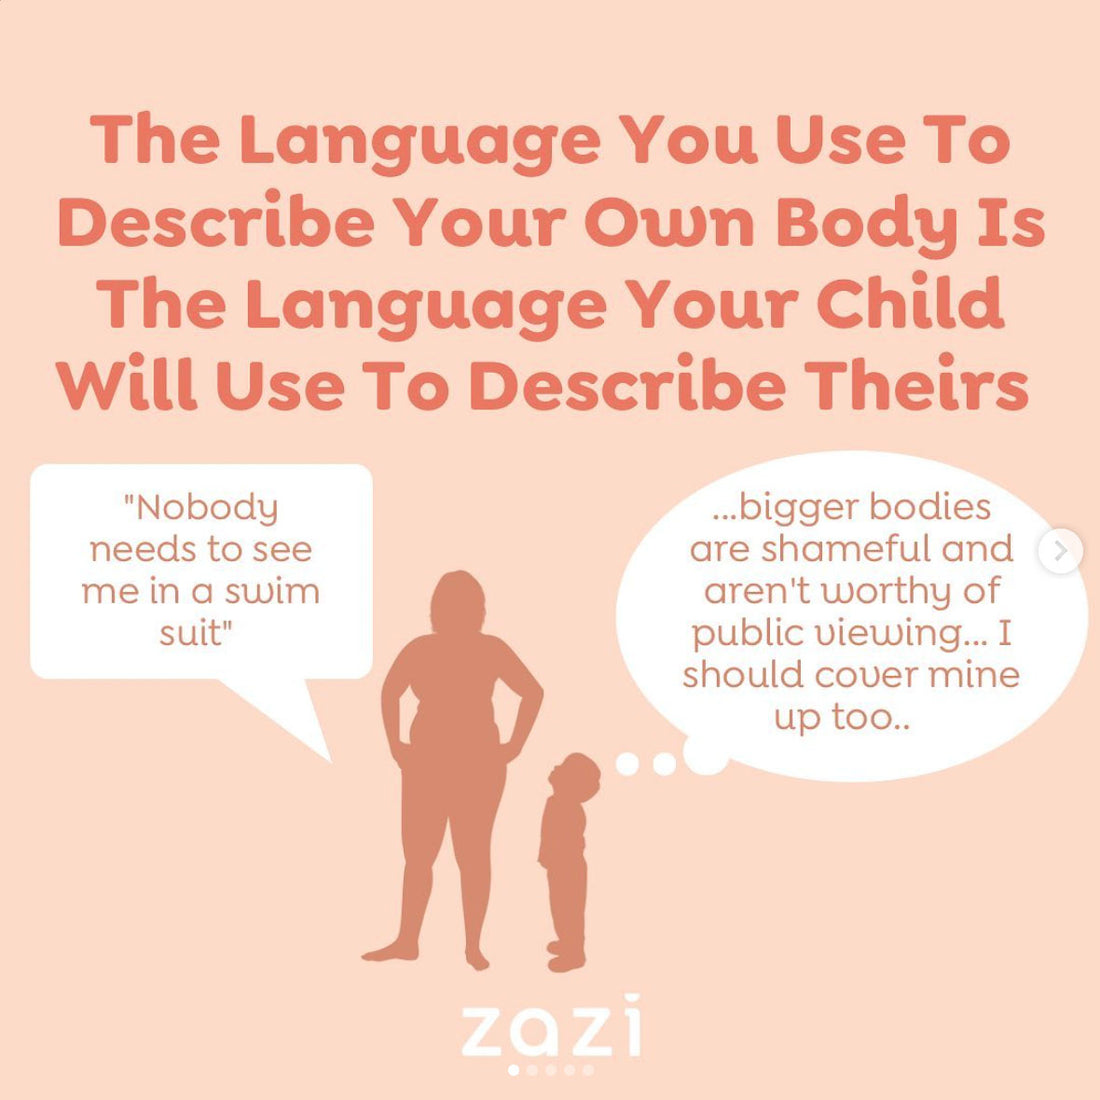 The Language You use to Describe Your Own Body is the Language Your Child will Use to Describe Theirs